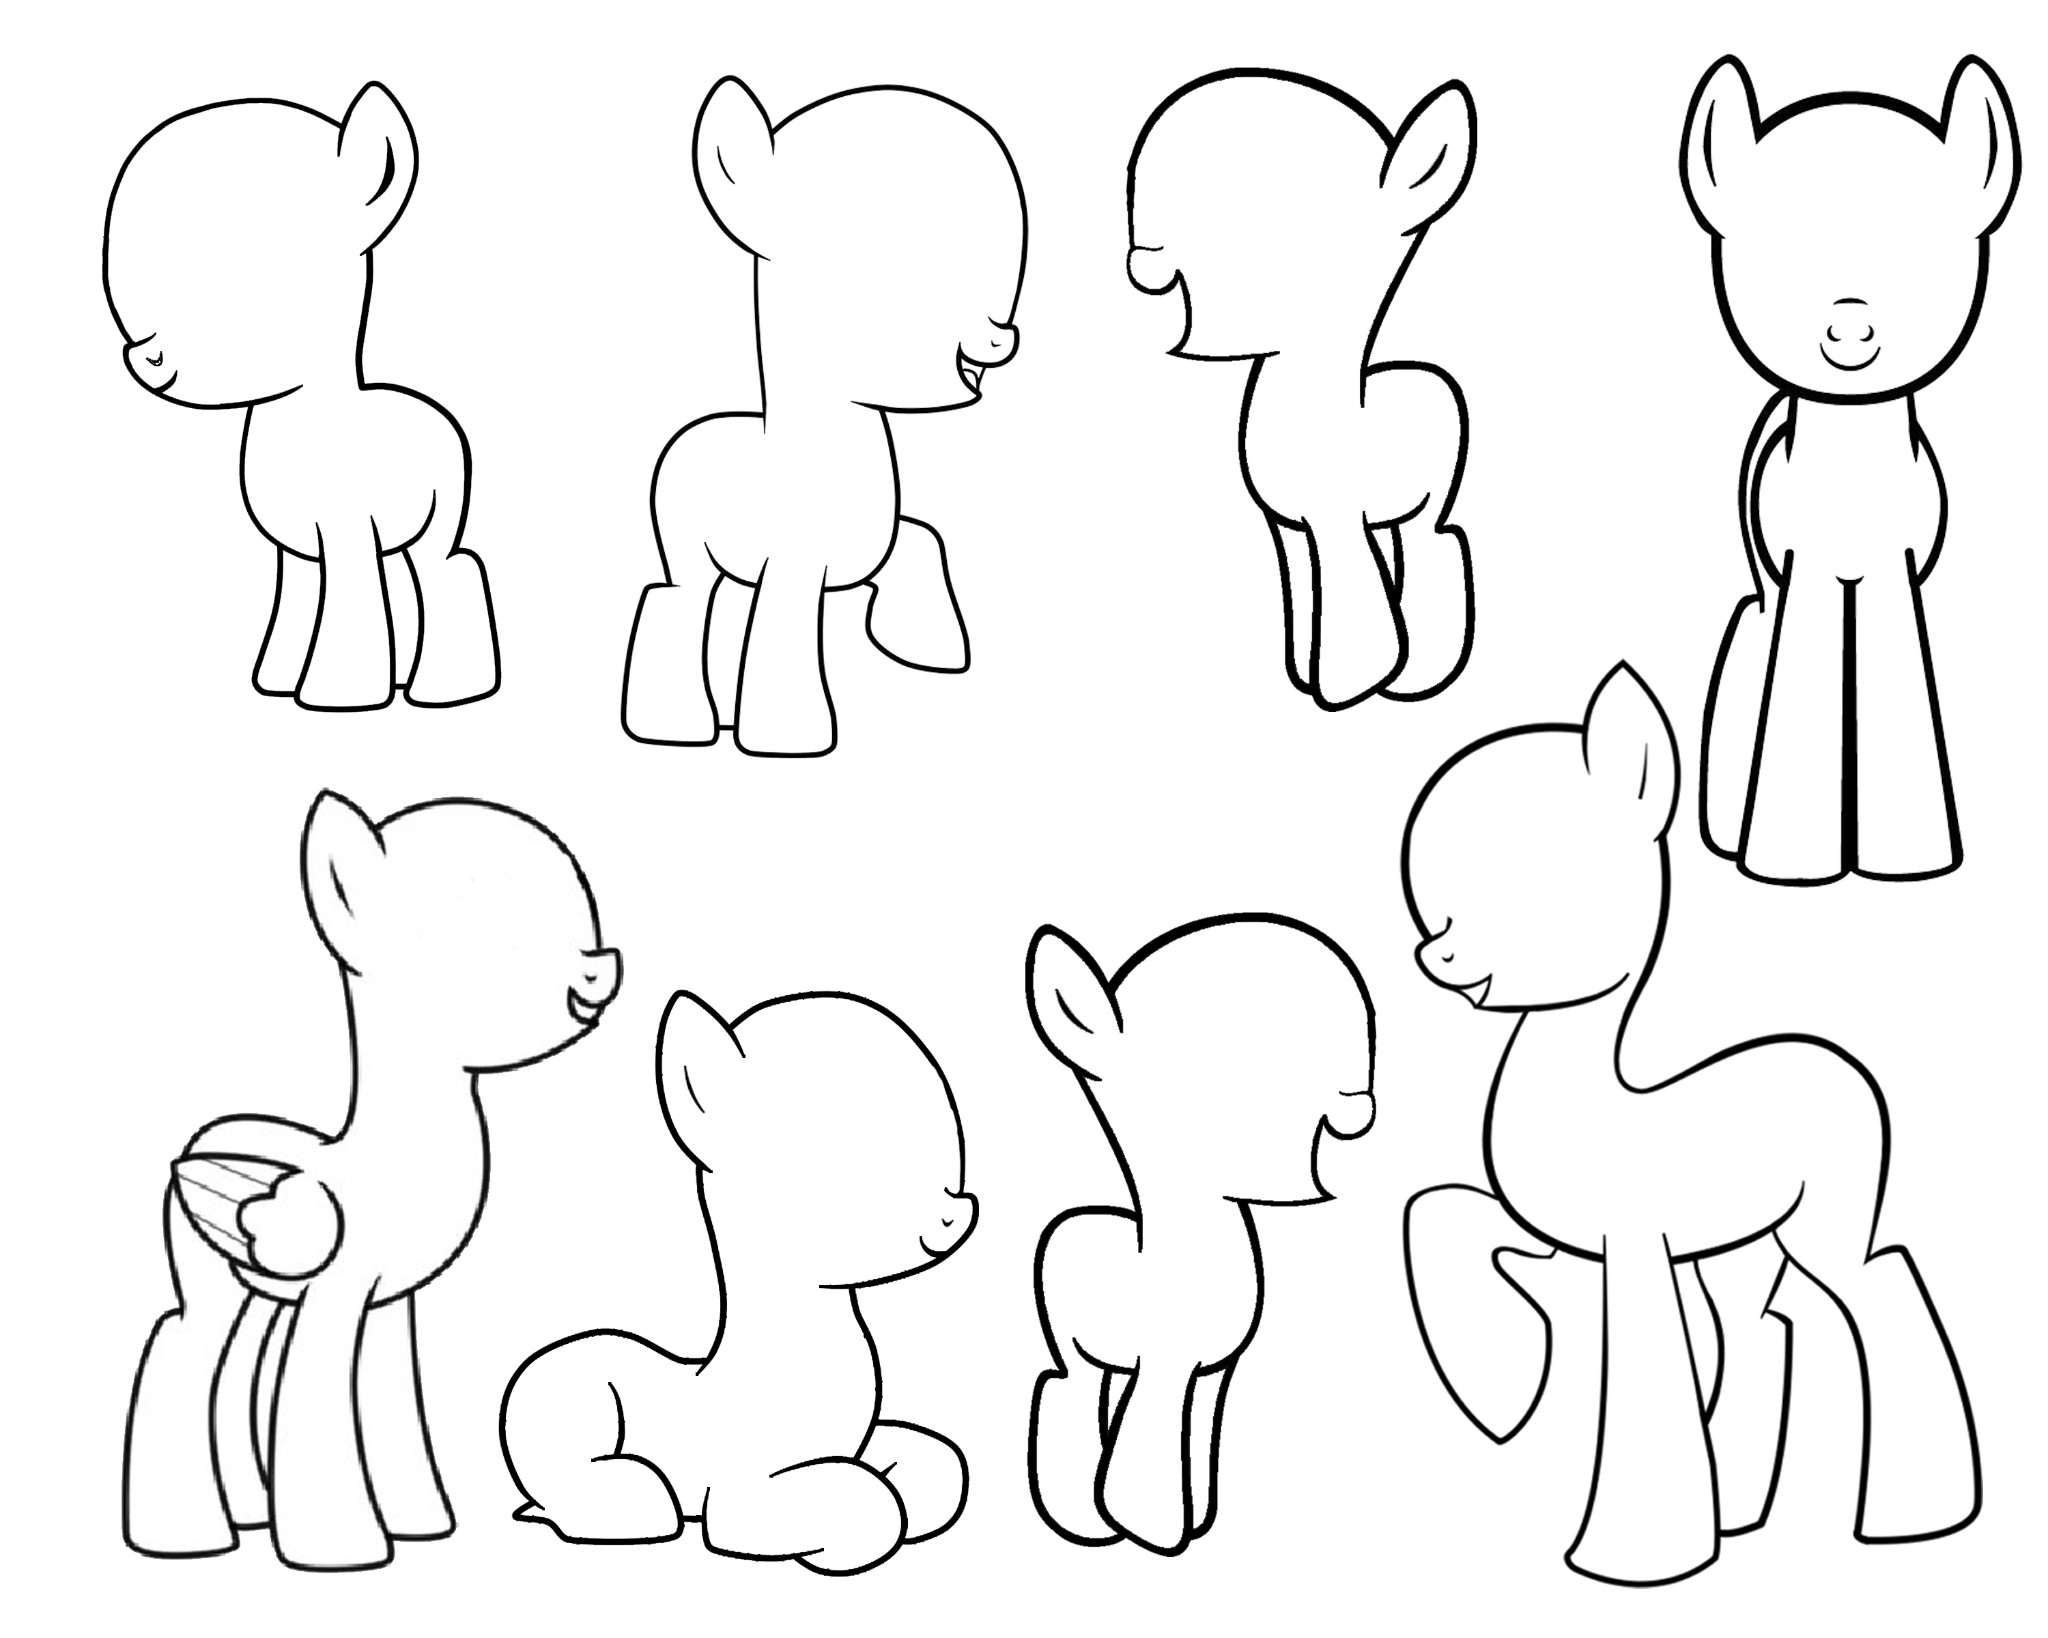 Blank My Little Pony Coloring Pages at GetDrawings | Free download